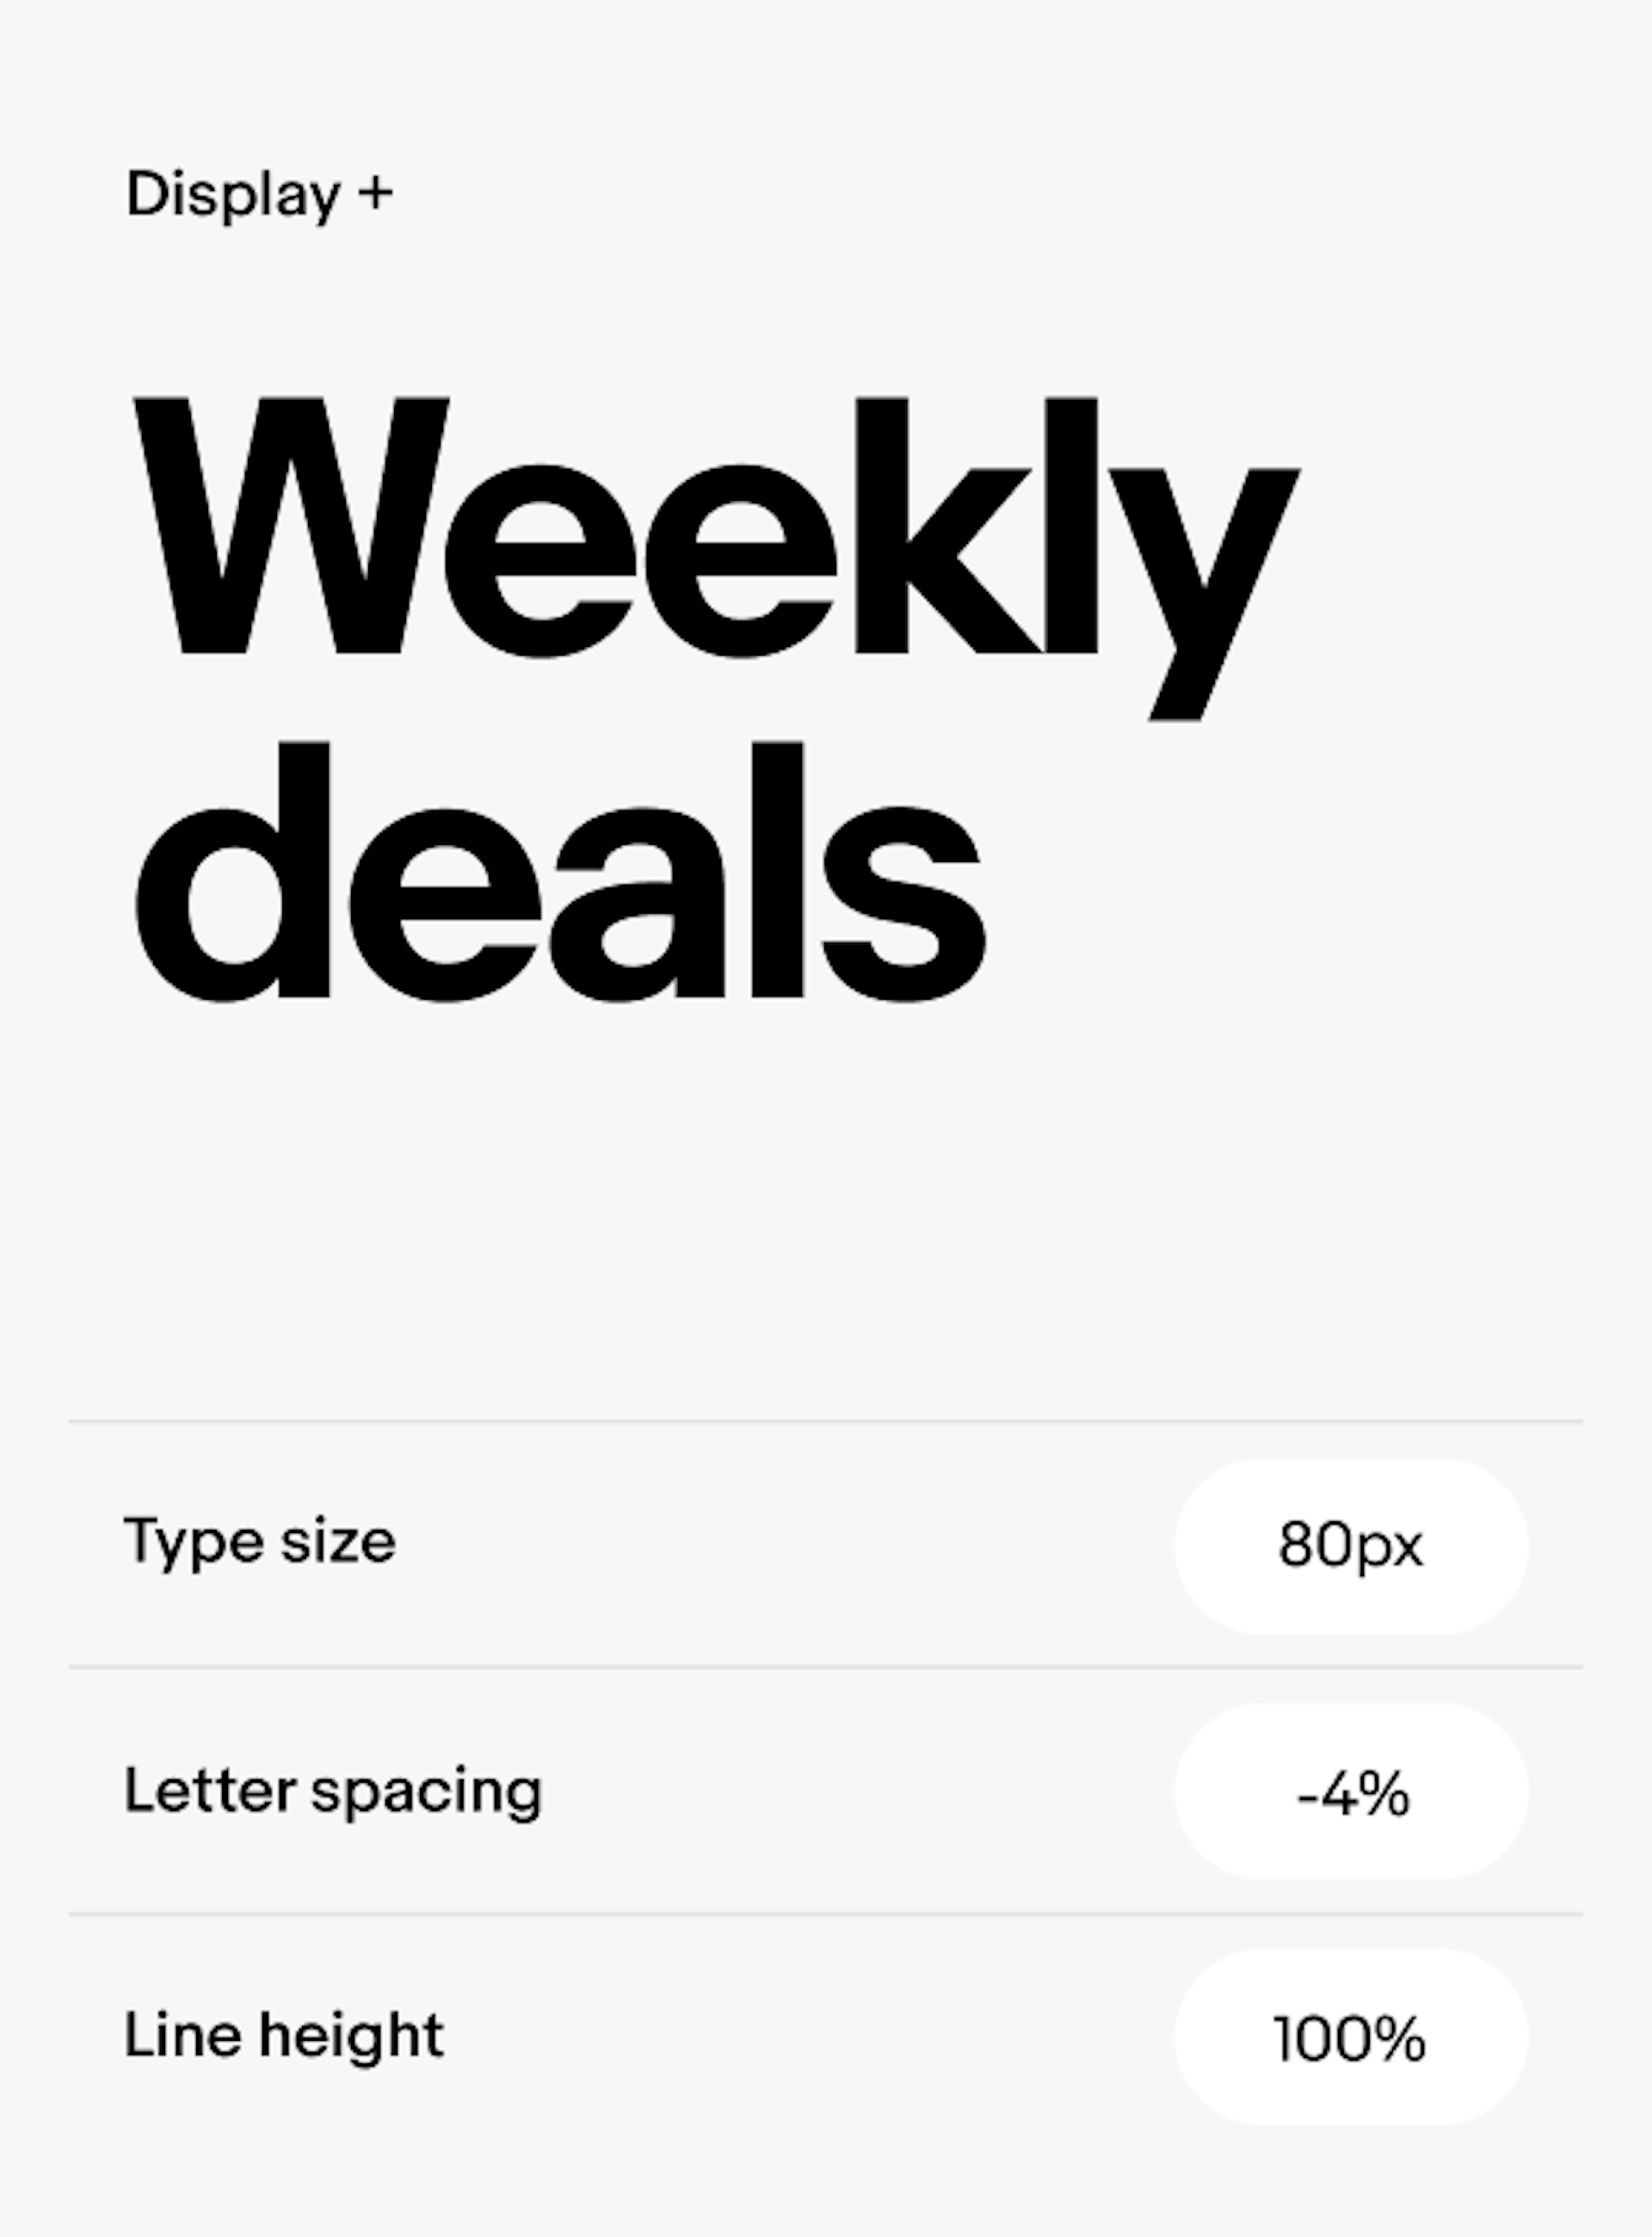 Display + example text: 'Weekly deals.' Display + has type size 80px, letter spacing -4%, line height 100%. 